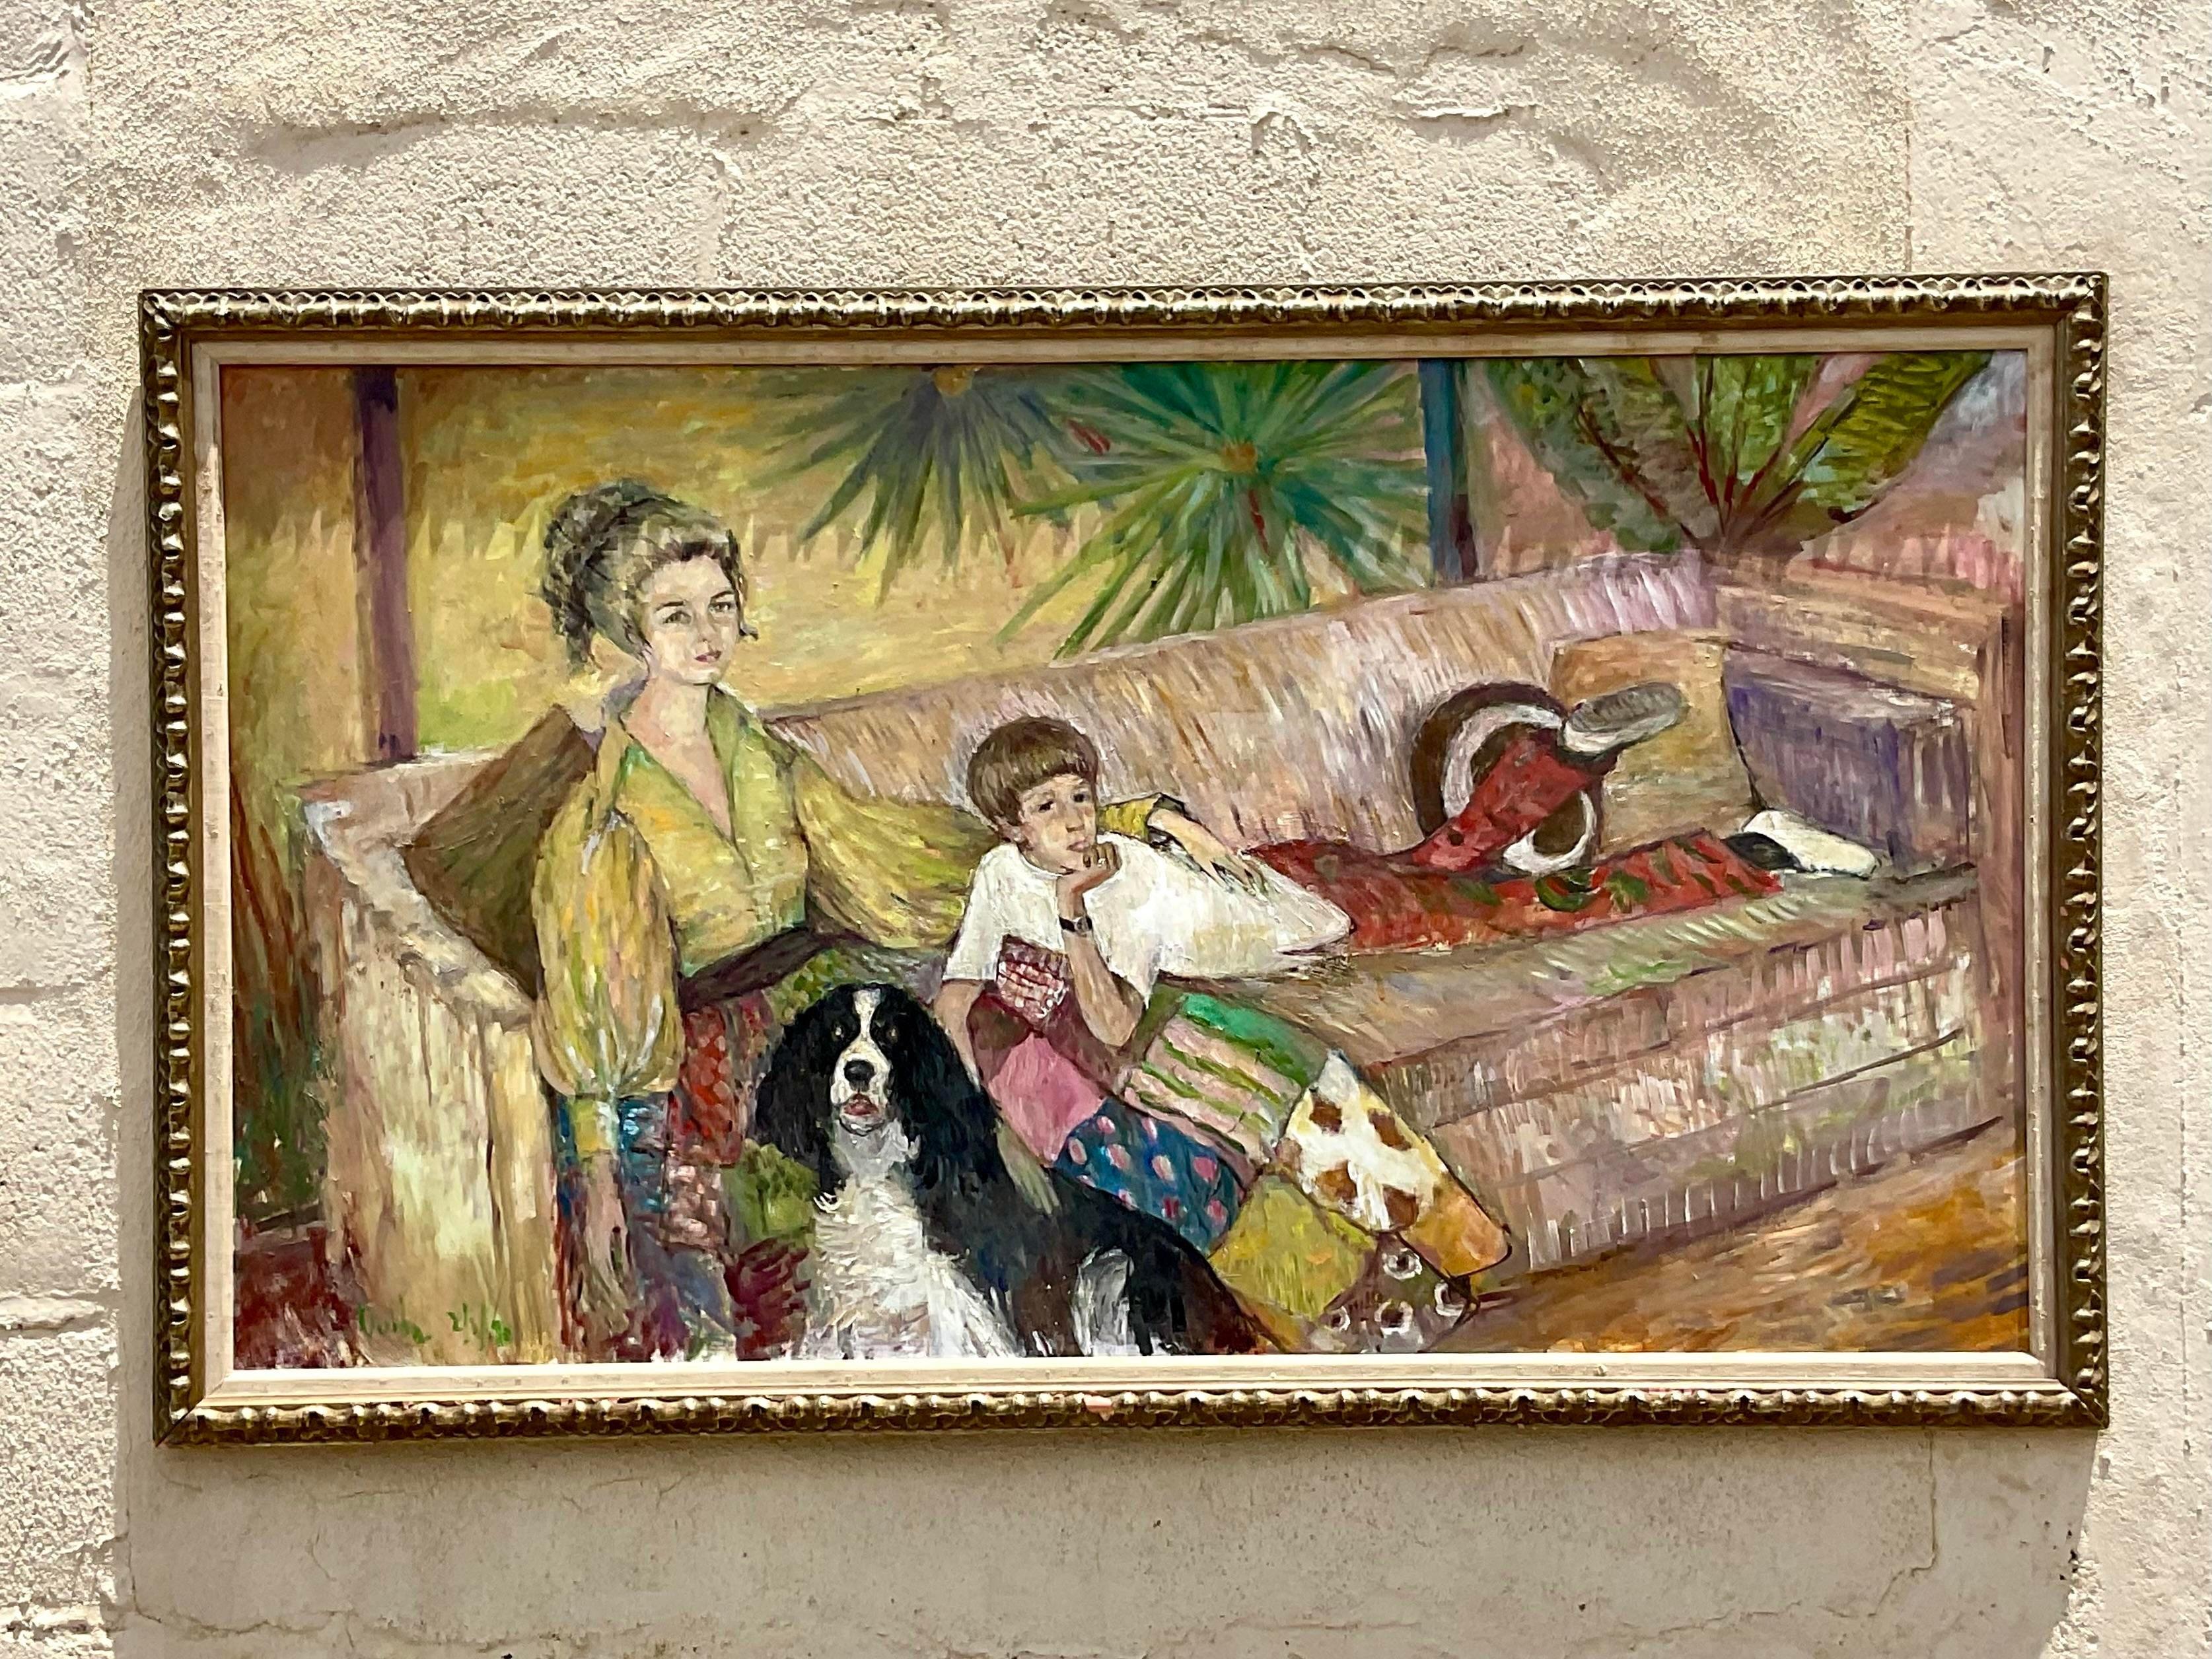 A fabulous vintage Boho oil portrait on board. A fabulous composition of a Palm Beach mother and son. Done by the local celebrity artist Ouida George. Acquired from a Palm Beach estate.